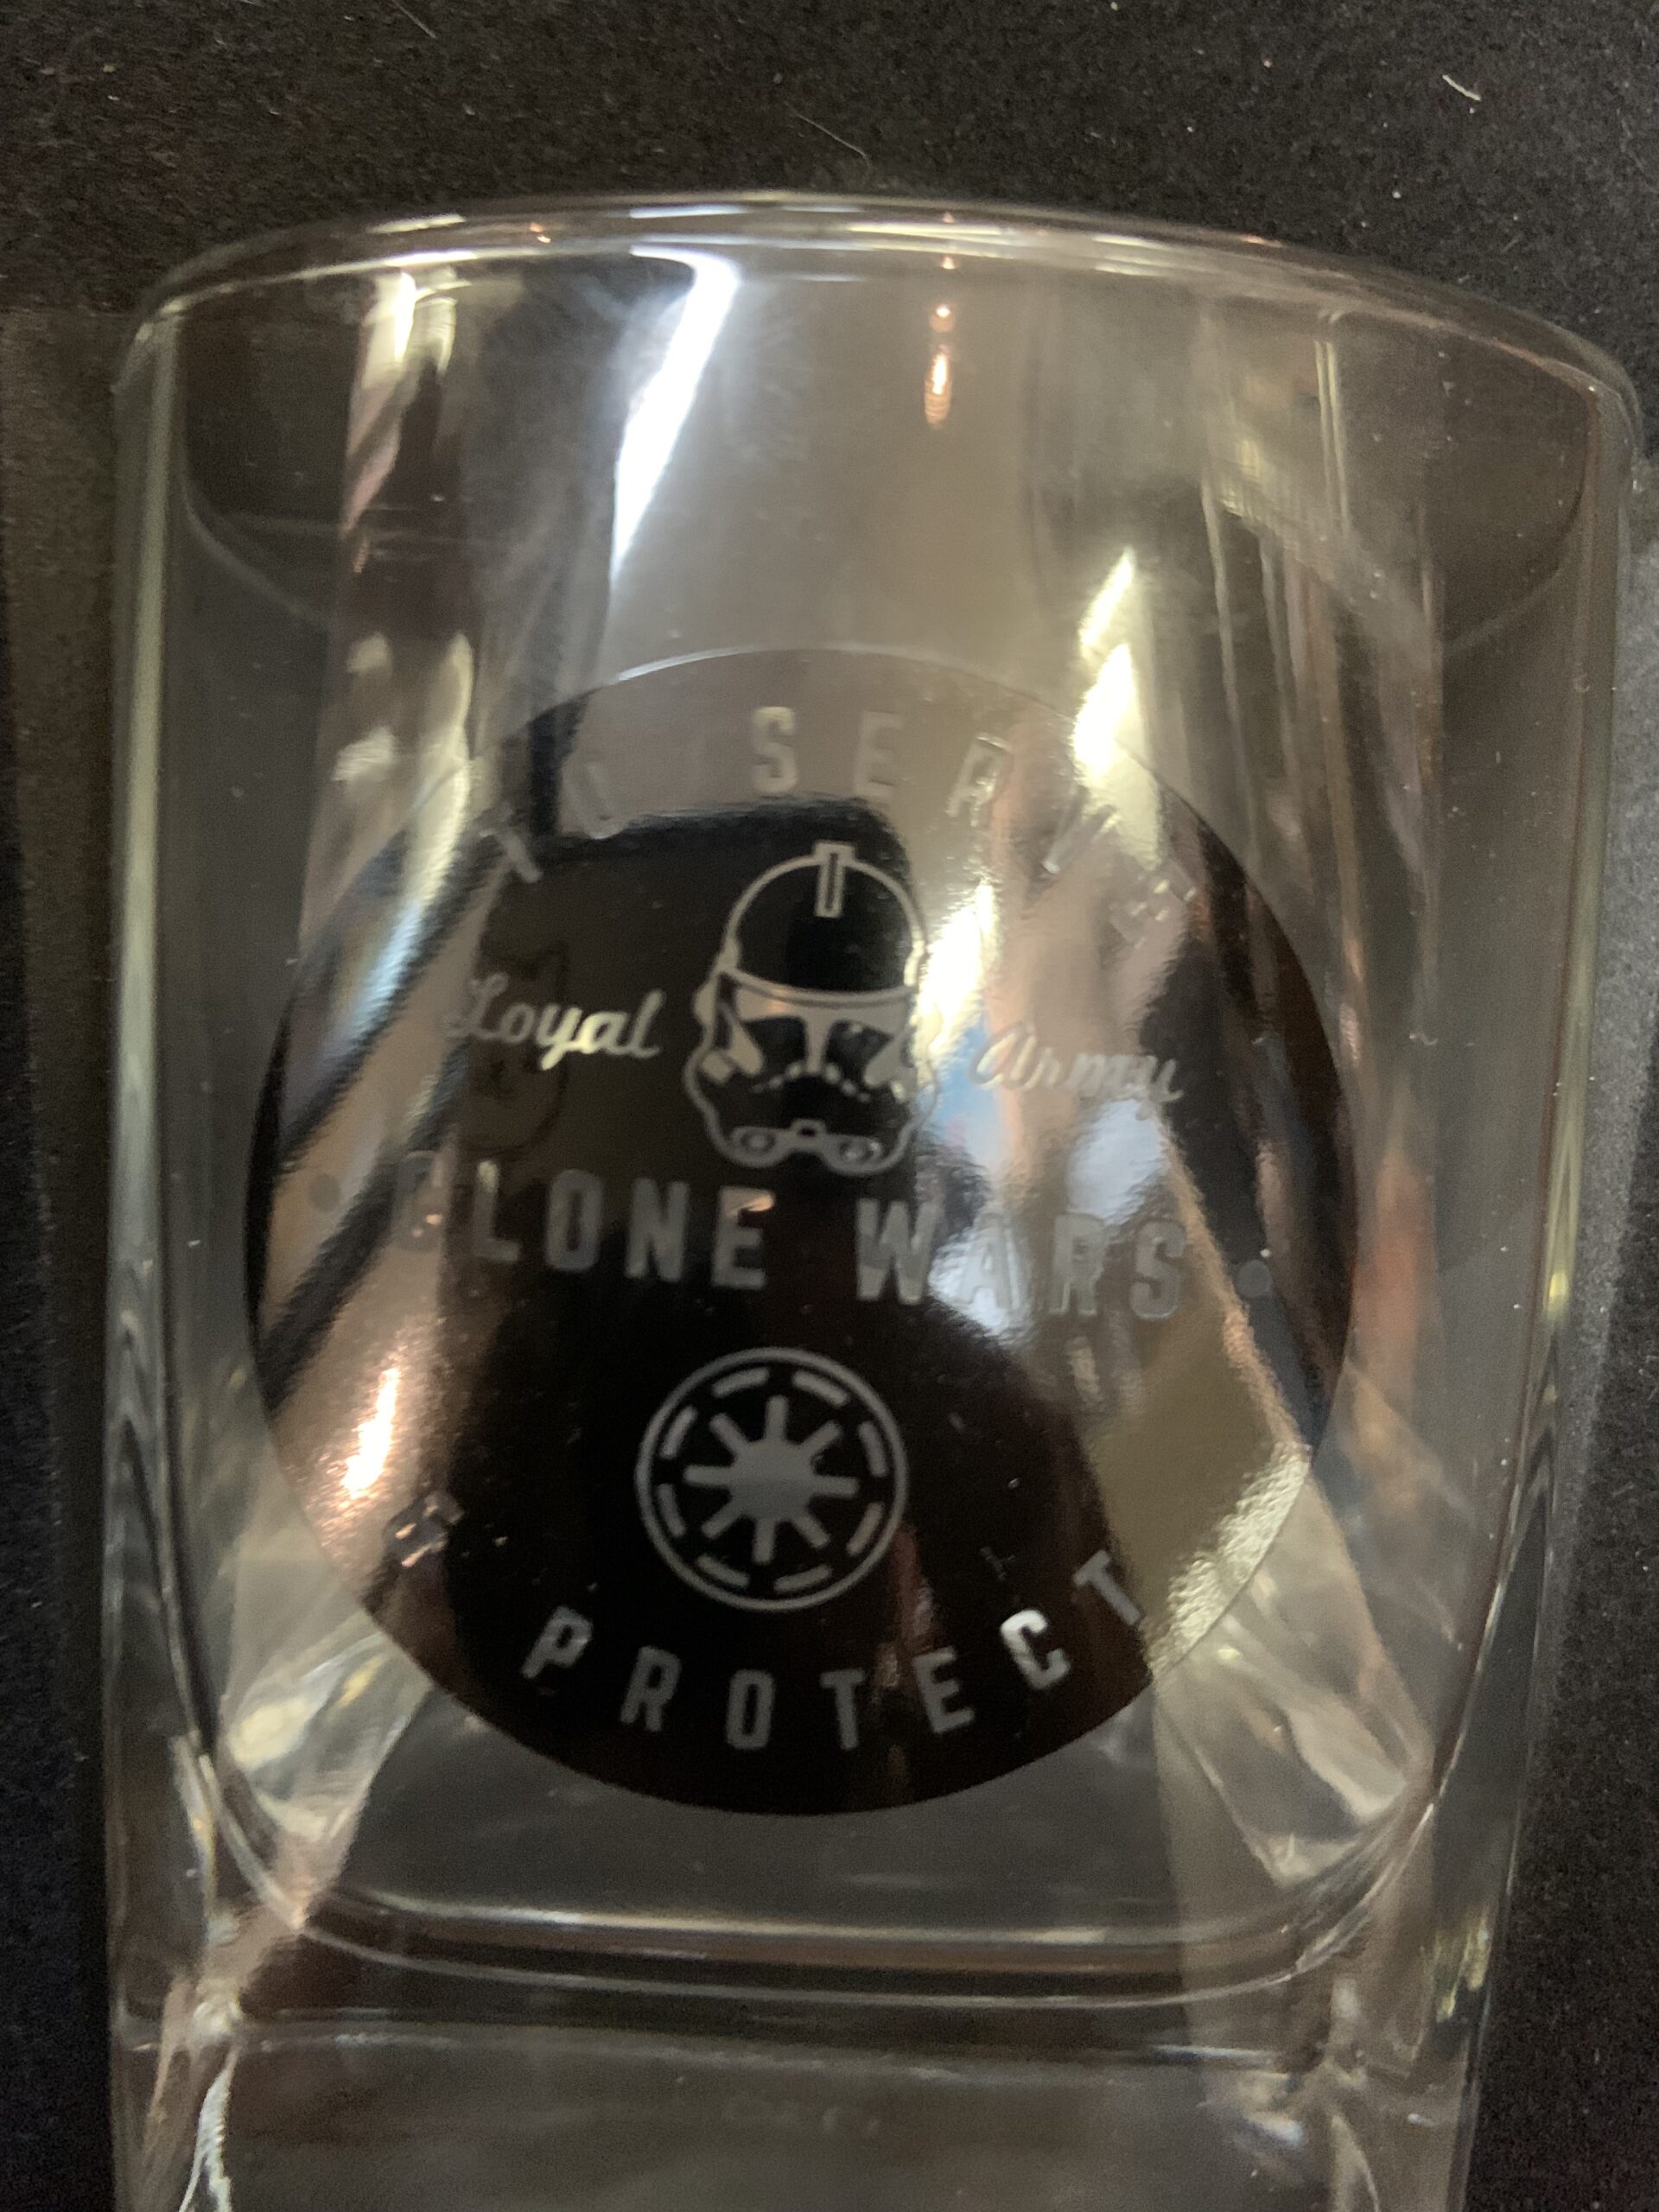 Item from the 2019 Lucasfilm Crew Gift.